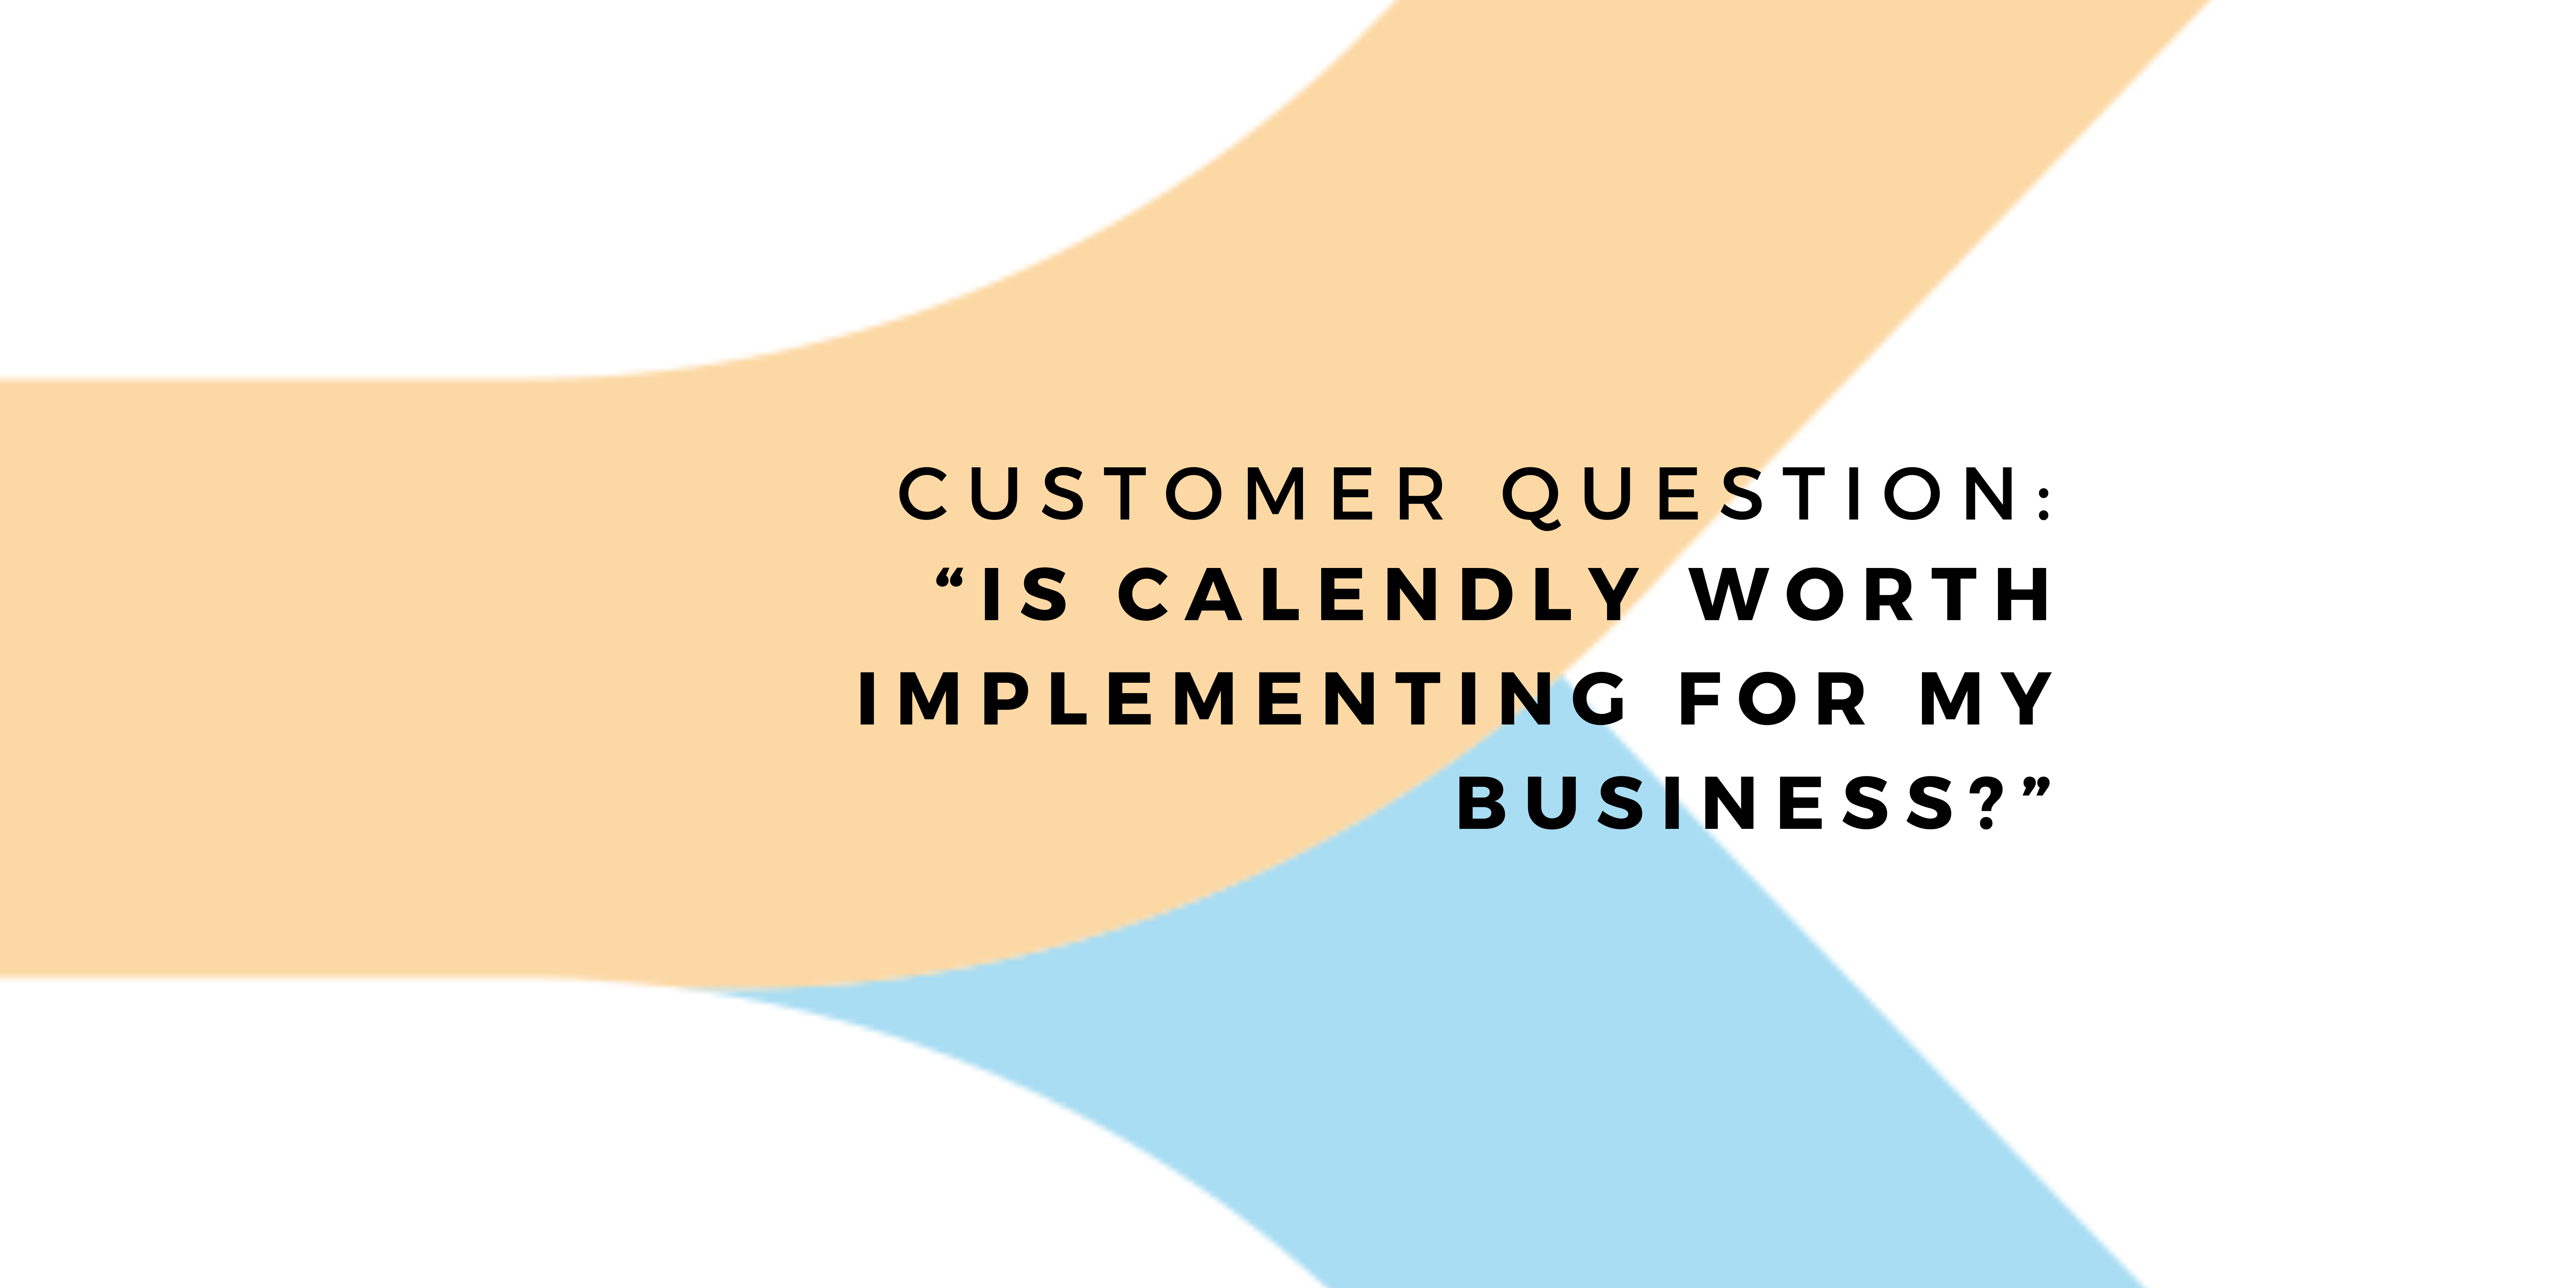 Customer Question: Is Calendly Worth Implementing For My Business?